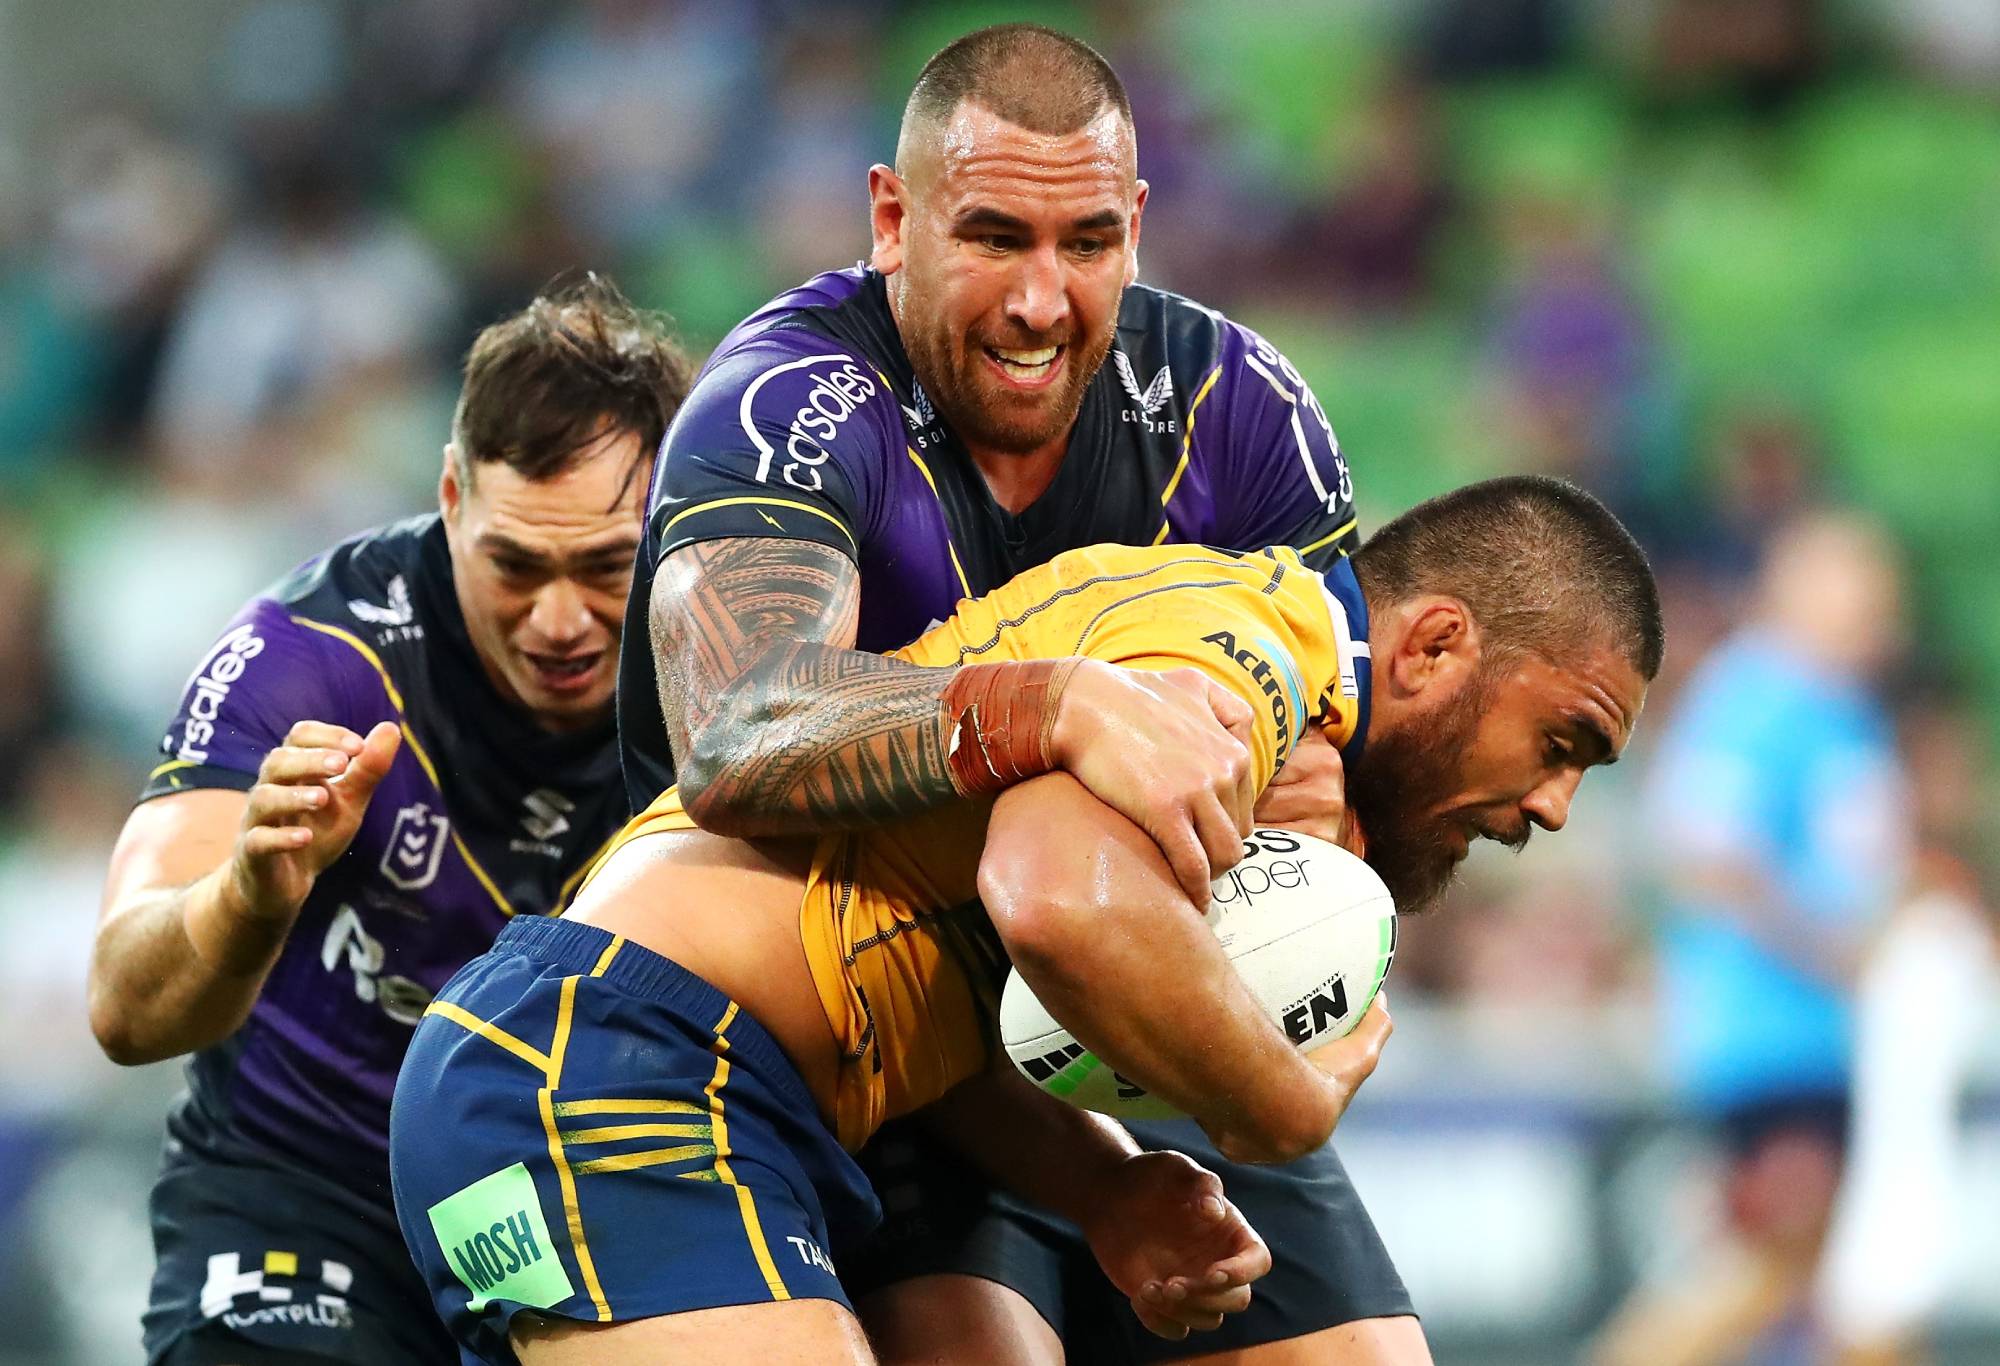 MELBOURNE, AUSTRALIA - MARCH 26: Nelson Asofa-Solomona of the Storm tackles Isaiah Papali'i of the Eels during the round three NRL match between the Melbourne Storm and the Parramatta Eels at AAMI Park, on March 26, 2022, in Melbourne, Australia. (Photo by Kelly Defina/Getty Images)